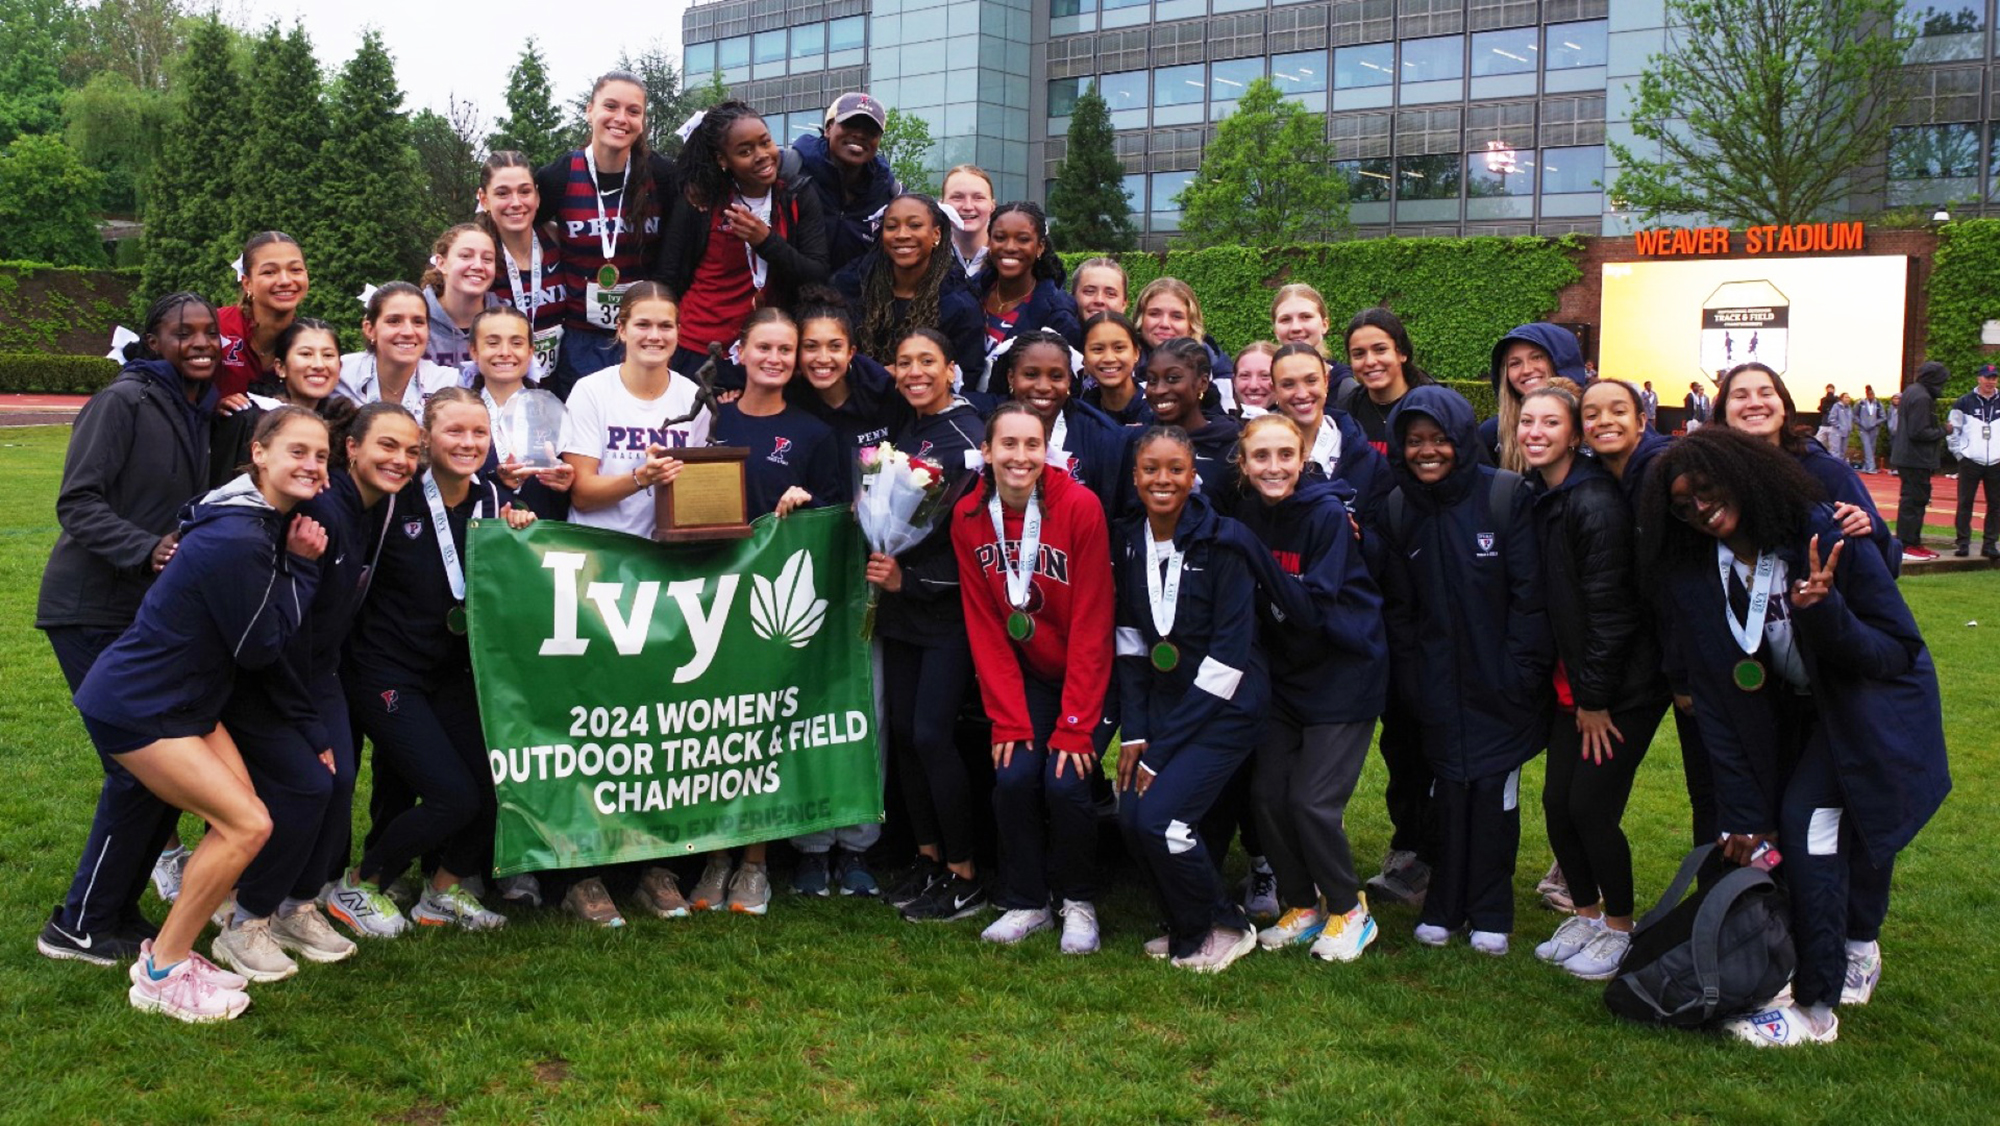 Members of the women's track and field team pose with the championship banner.